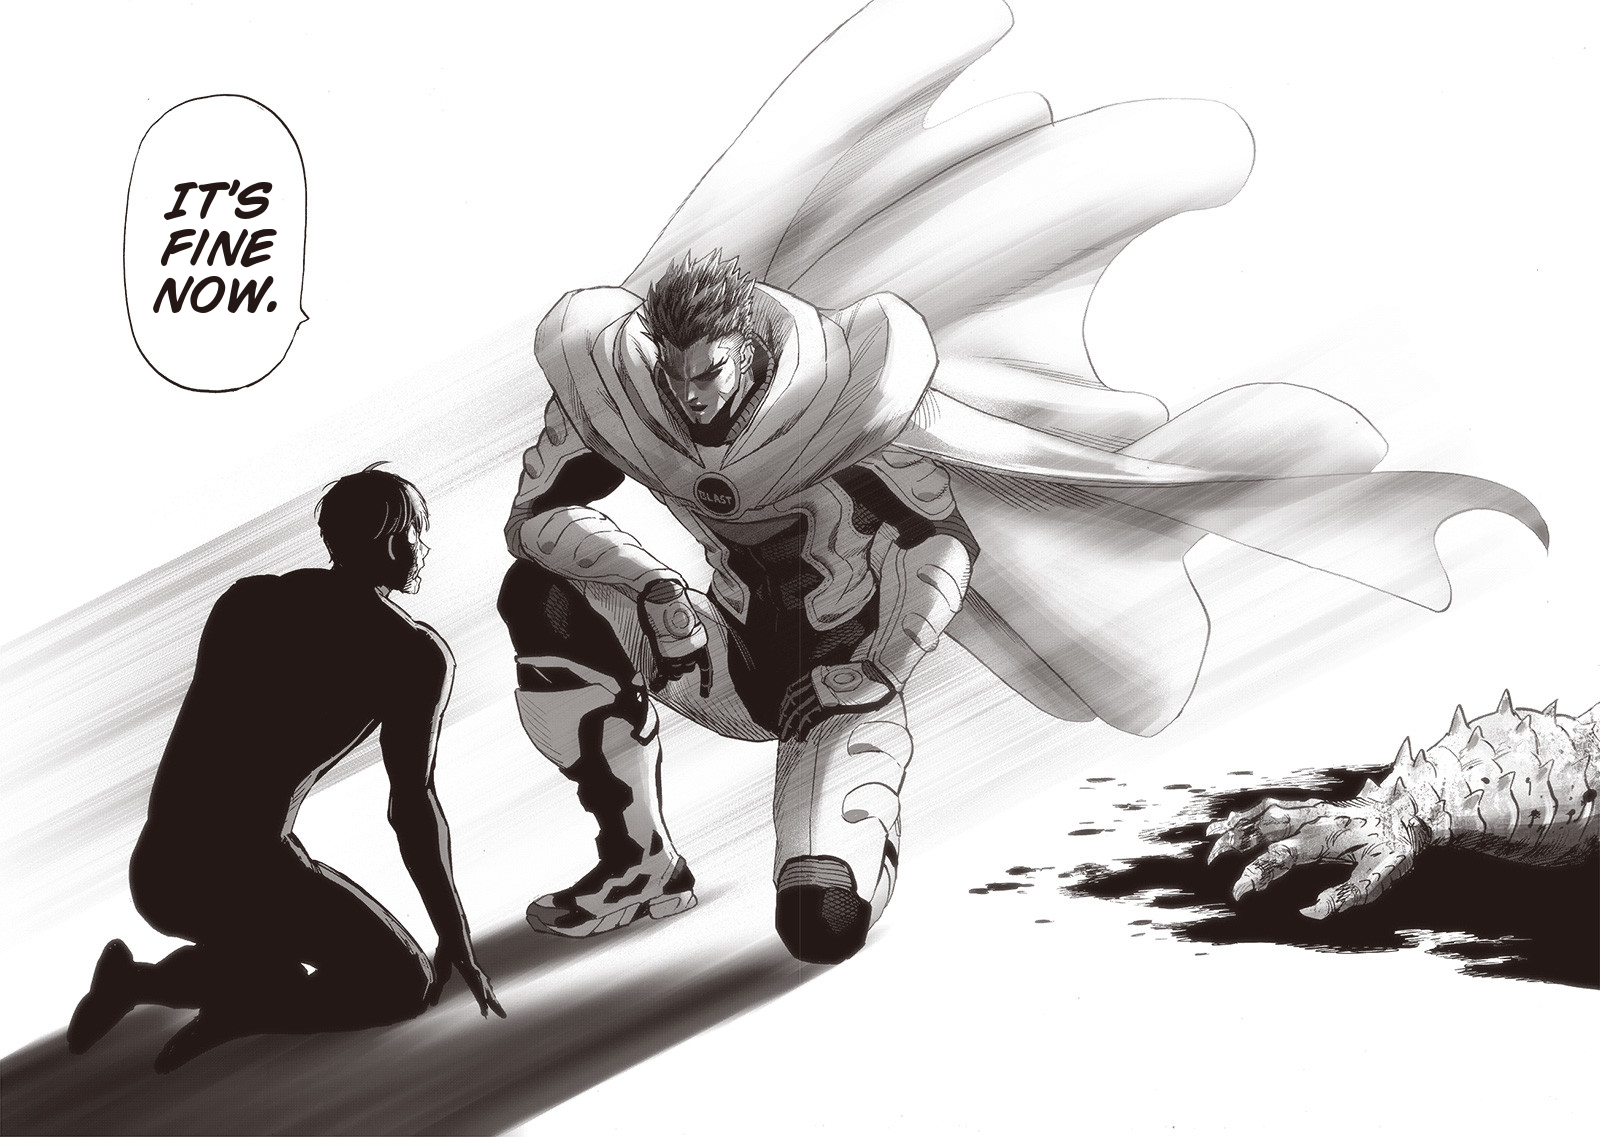 One Punch Man Manga 179 One Punch-Man Chapter 179 Discussion - Forums - MyAnimeList.net